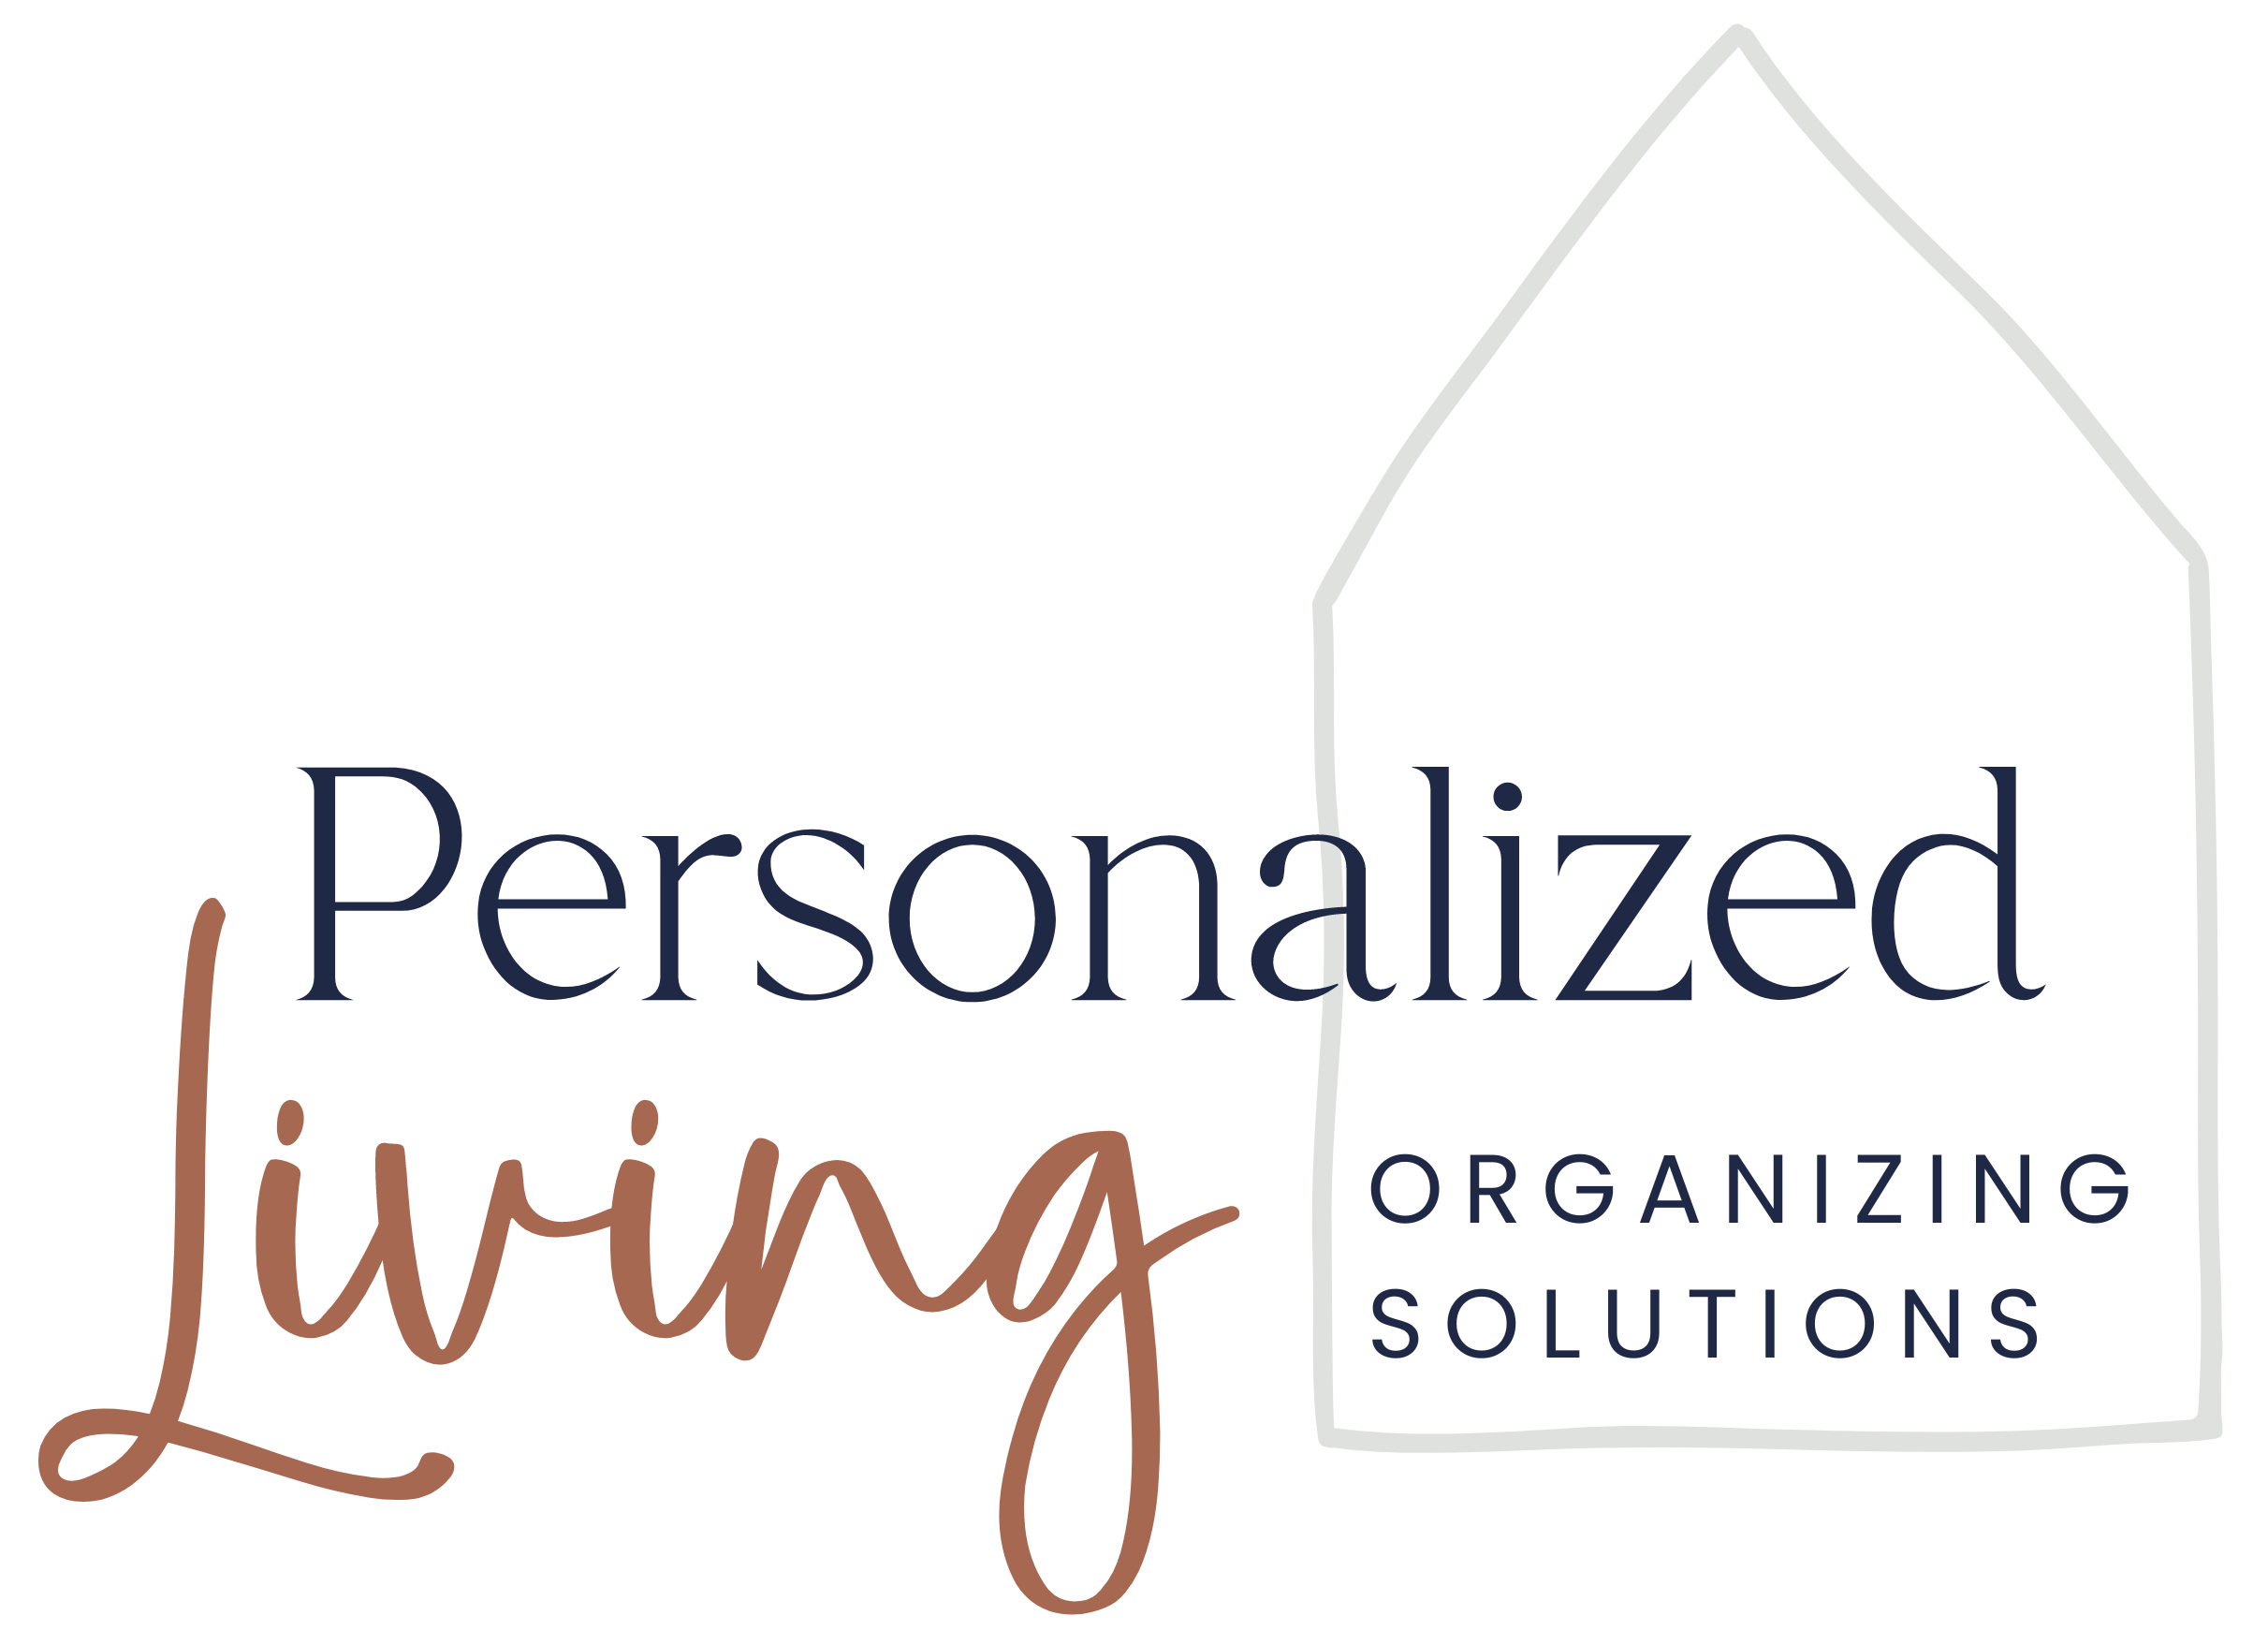 Personalized Living